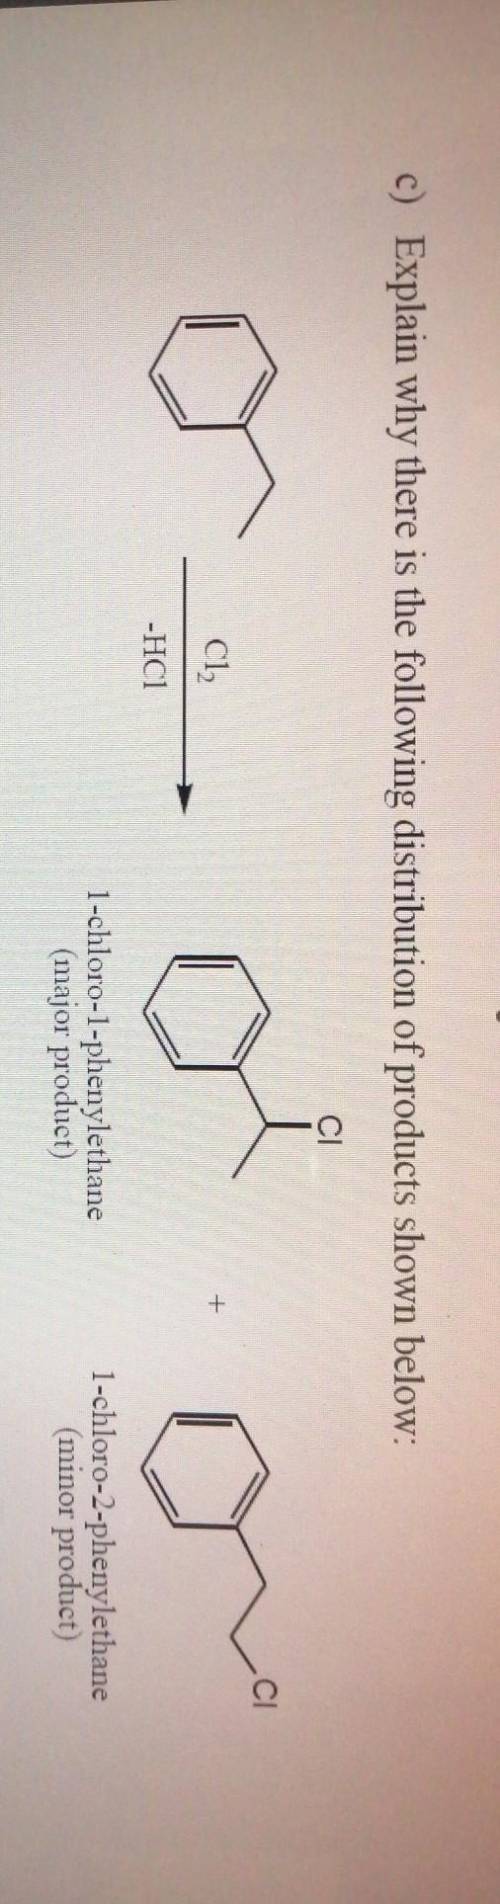 Please help me with this chemistry question